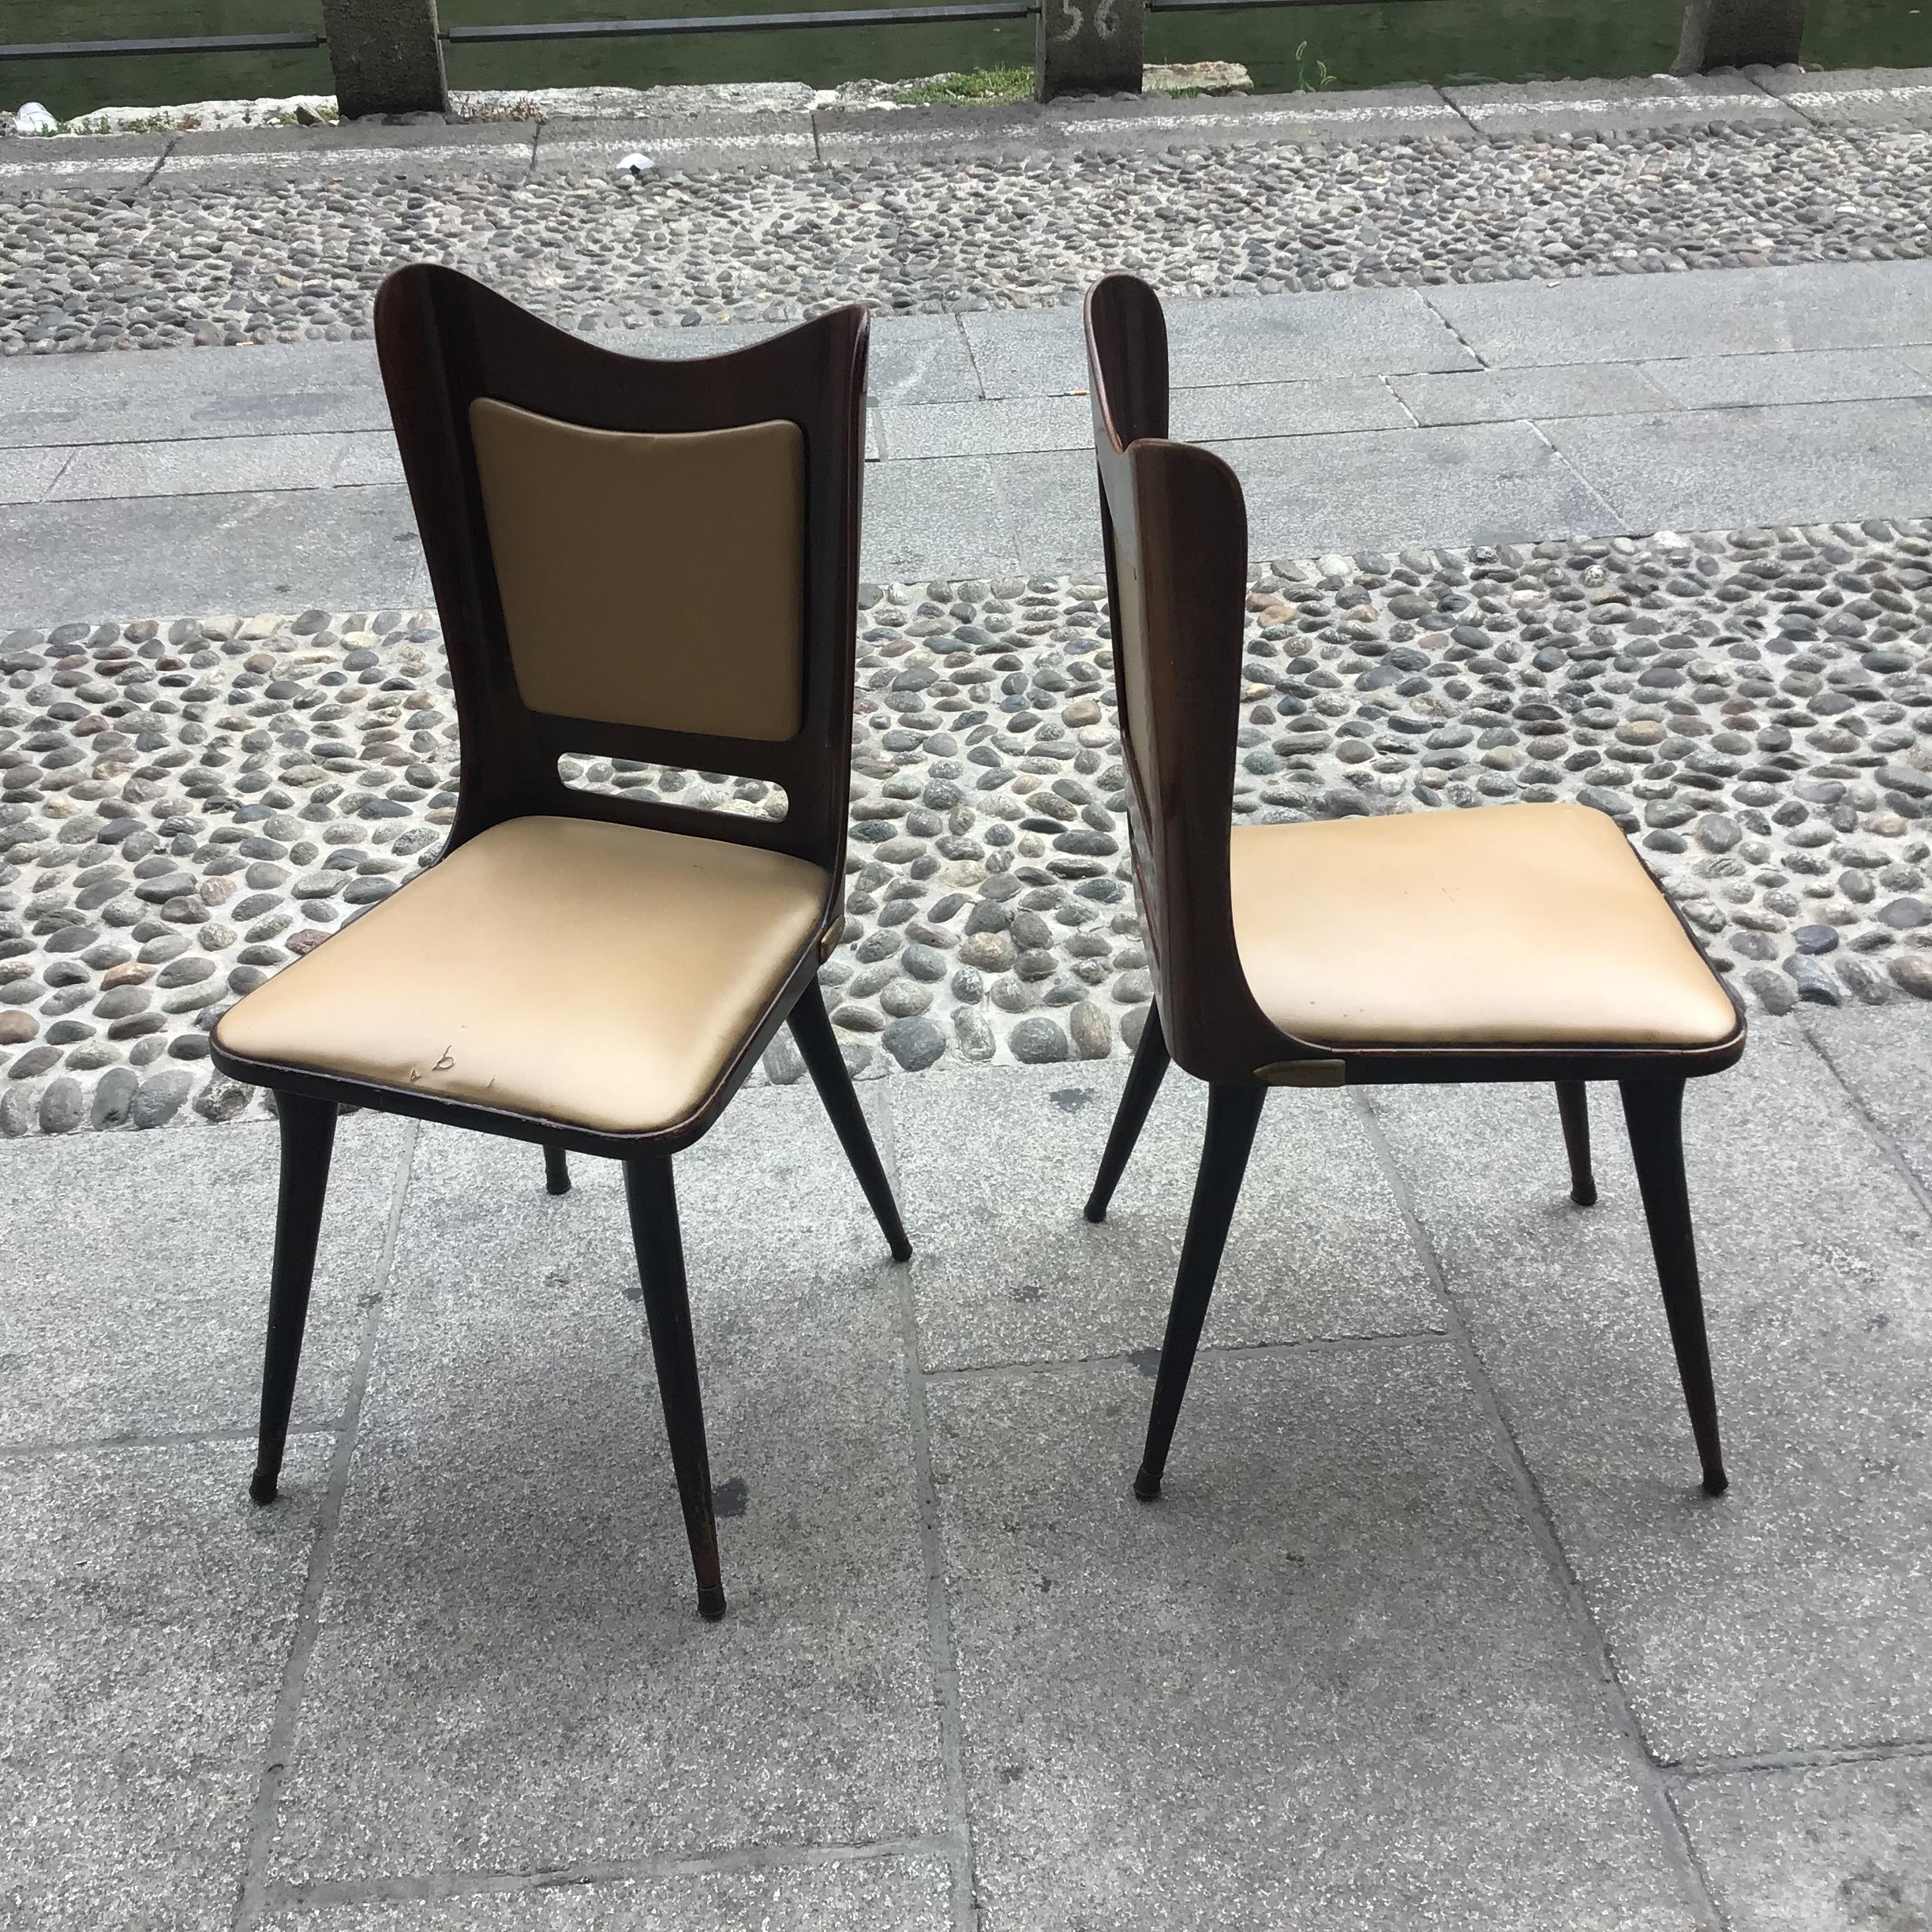 Carlo Ratti Chairs Wood Brass Skin 1955, Italy For Sale 11